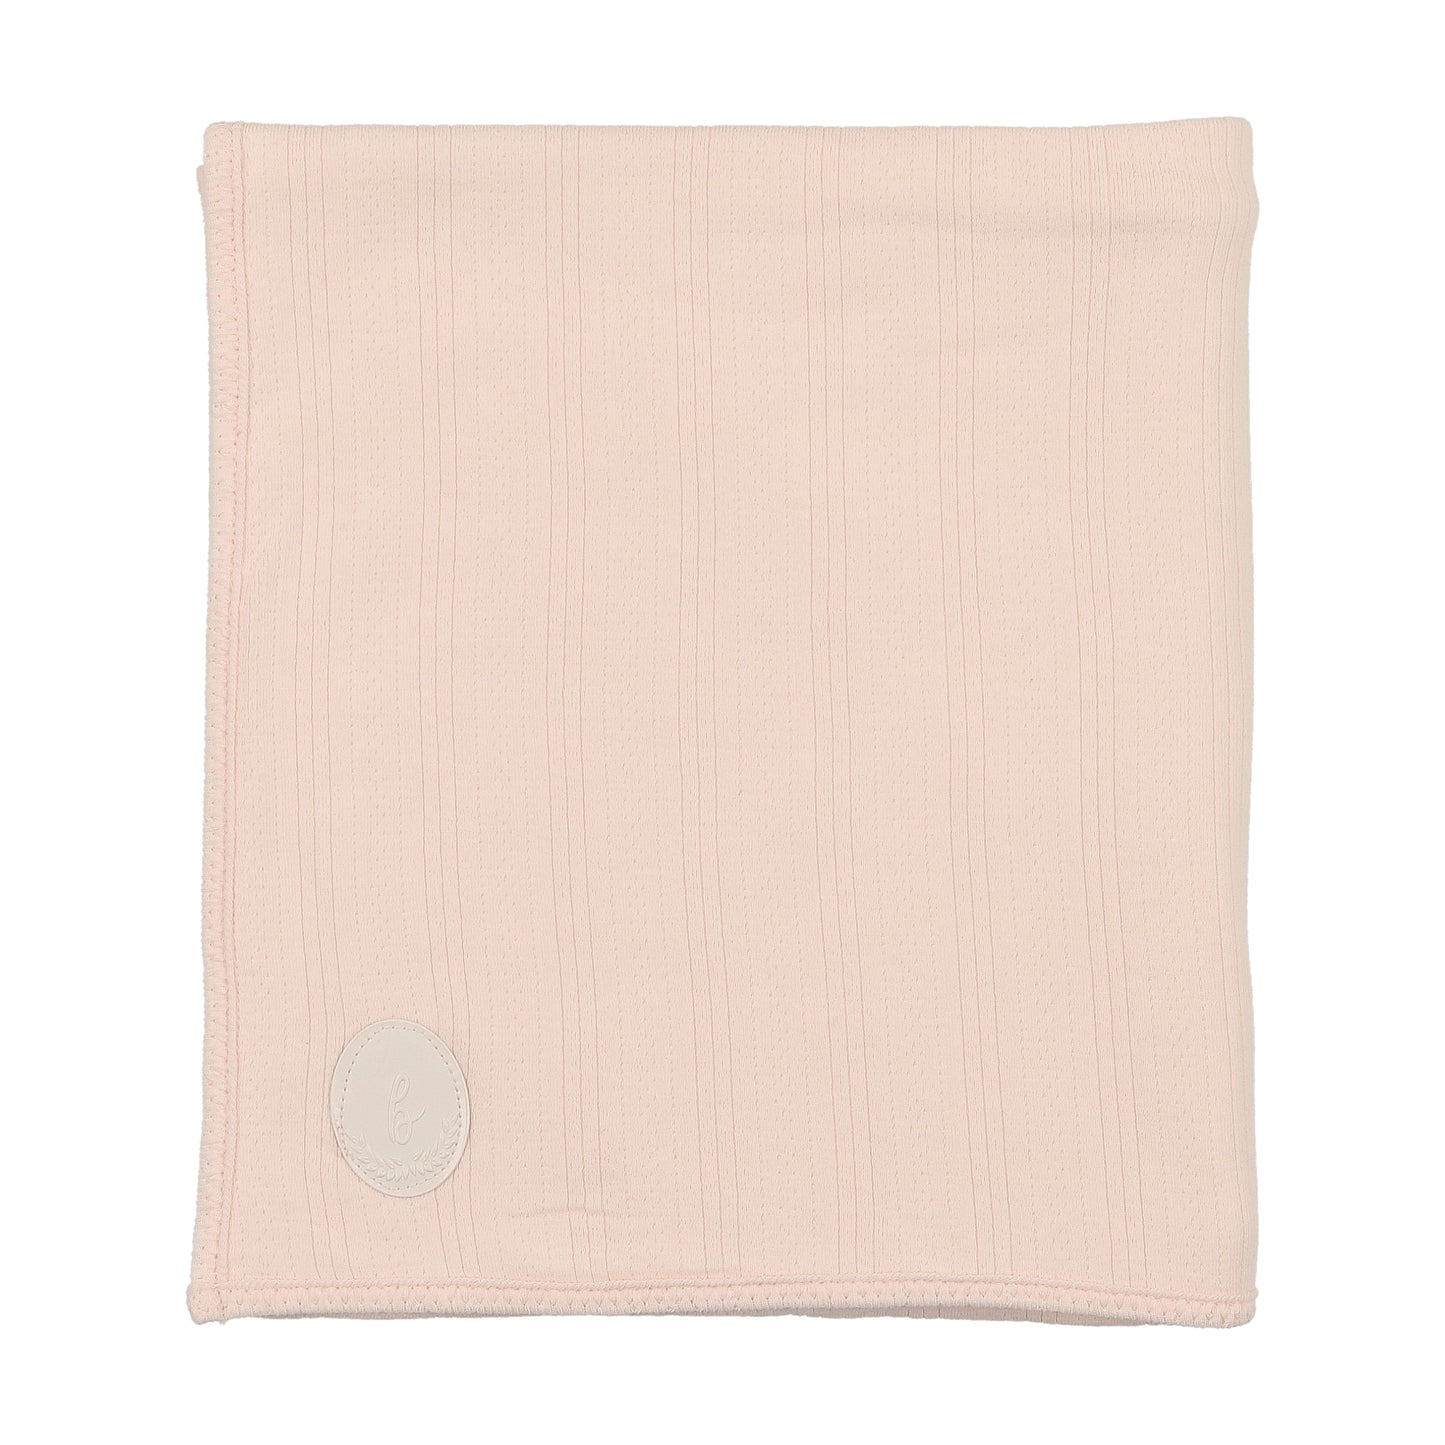 BEE & DEE BLOSSOM PINK POINTELLE ENGRAVED PLAQUE BLANKET